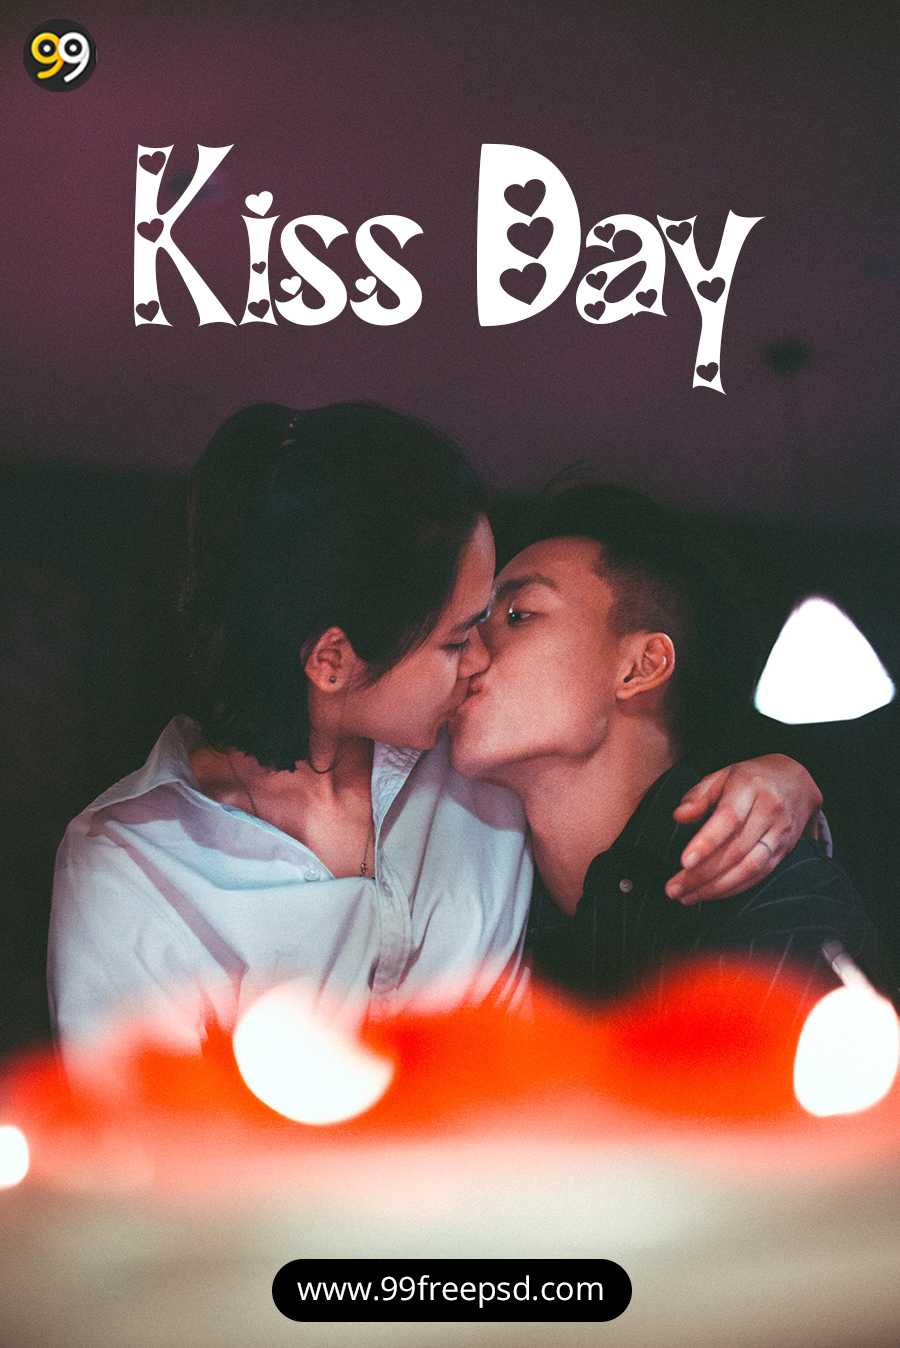 happy kiss-day-png-transparent-international-kissing-day-love-romance-hug-the-love-of-the-people-love-miscellaneous-couple-thumbnail